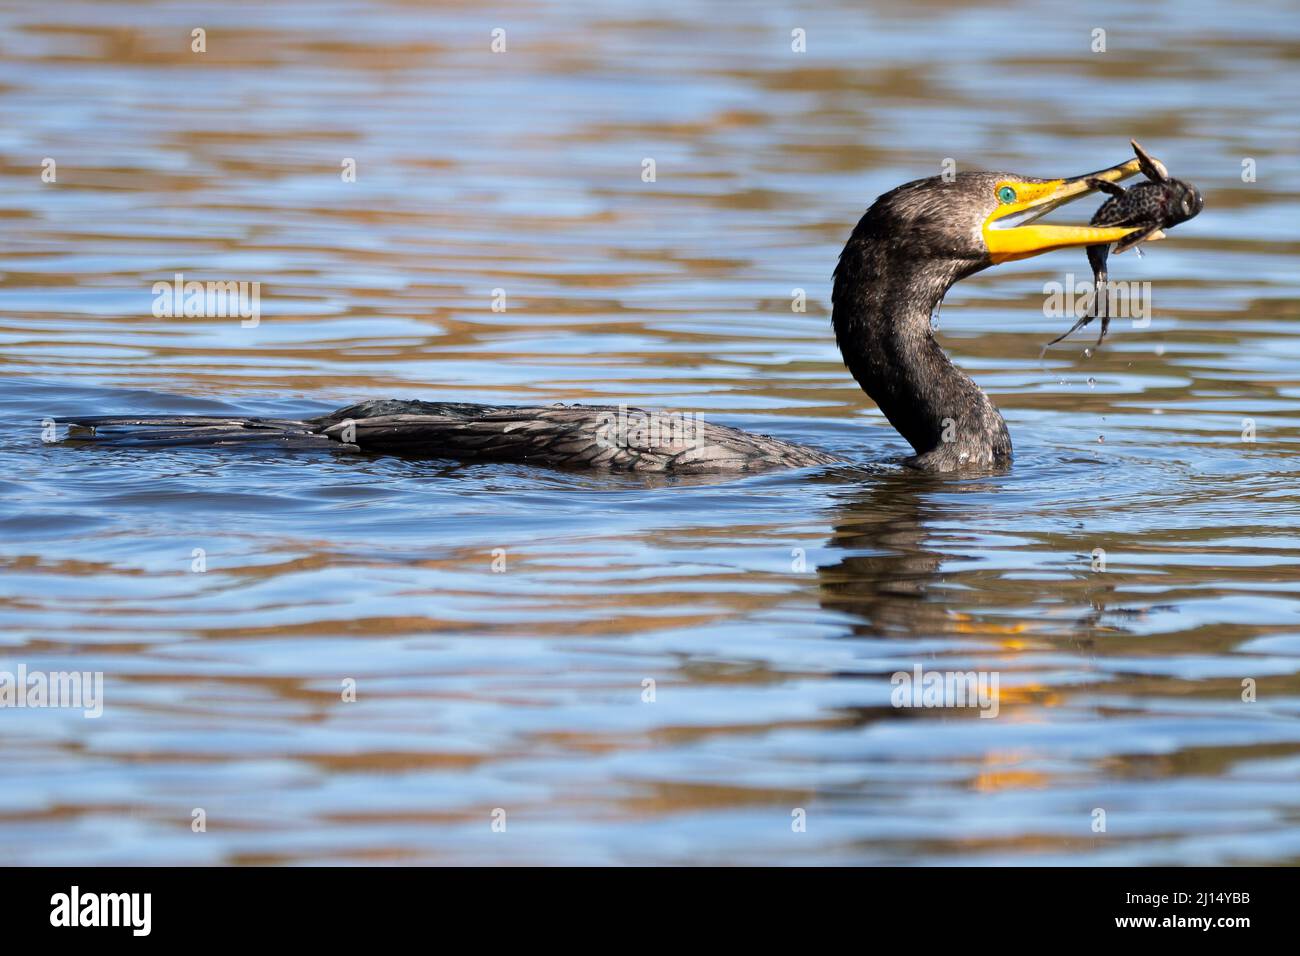 A double-crested cormorant (Nannopterum auritum) catches an amazon sailfin catfish (Pterygoplichthys pardalis) in the Sepulveda Basin Wildlife area Stock Photo